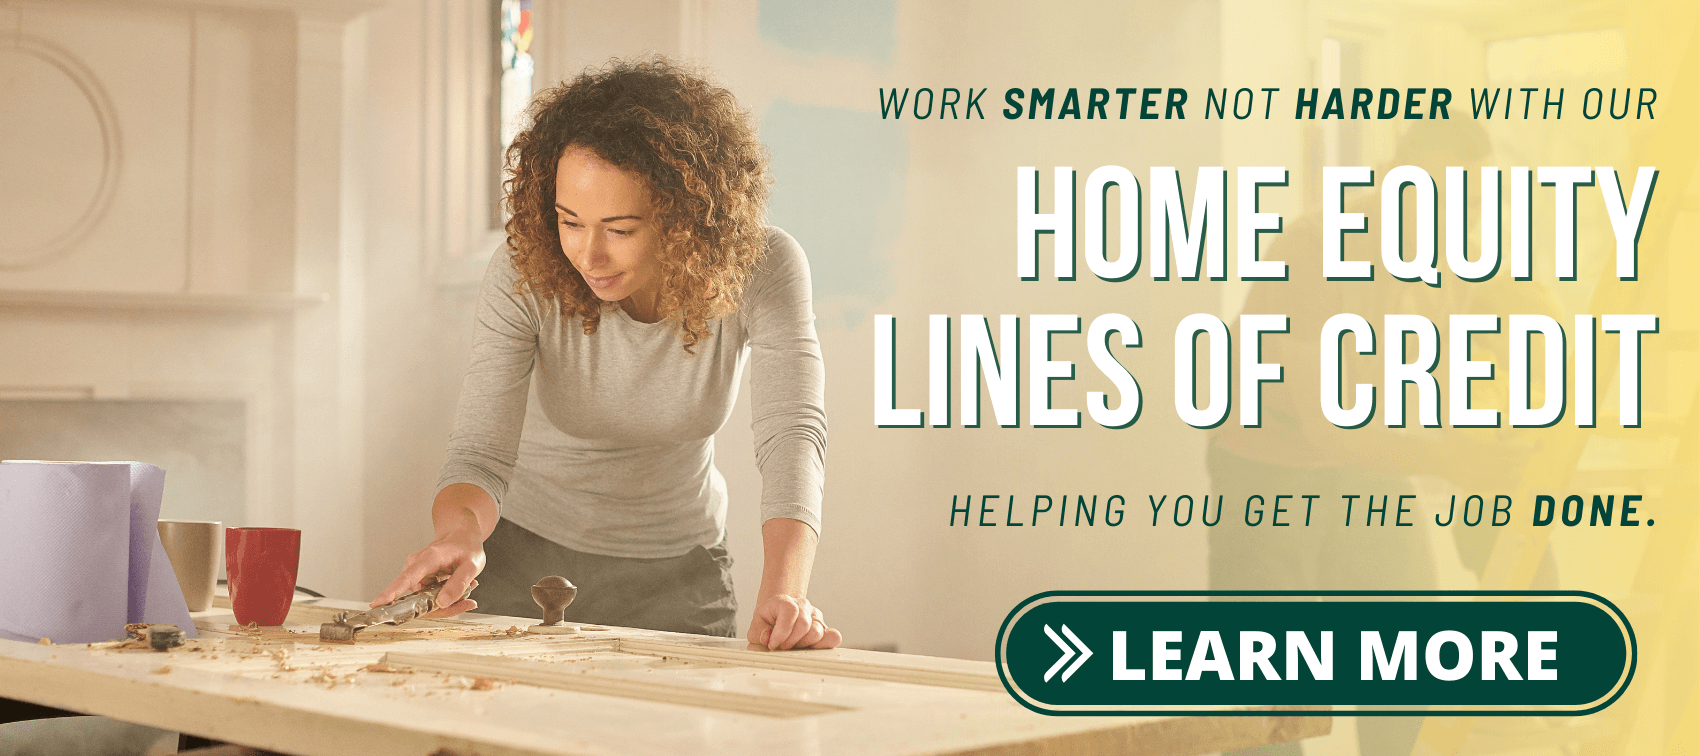 Work smarter not harder with our Home Equity Lines of Credit. Helping you get the job done. Learn More